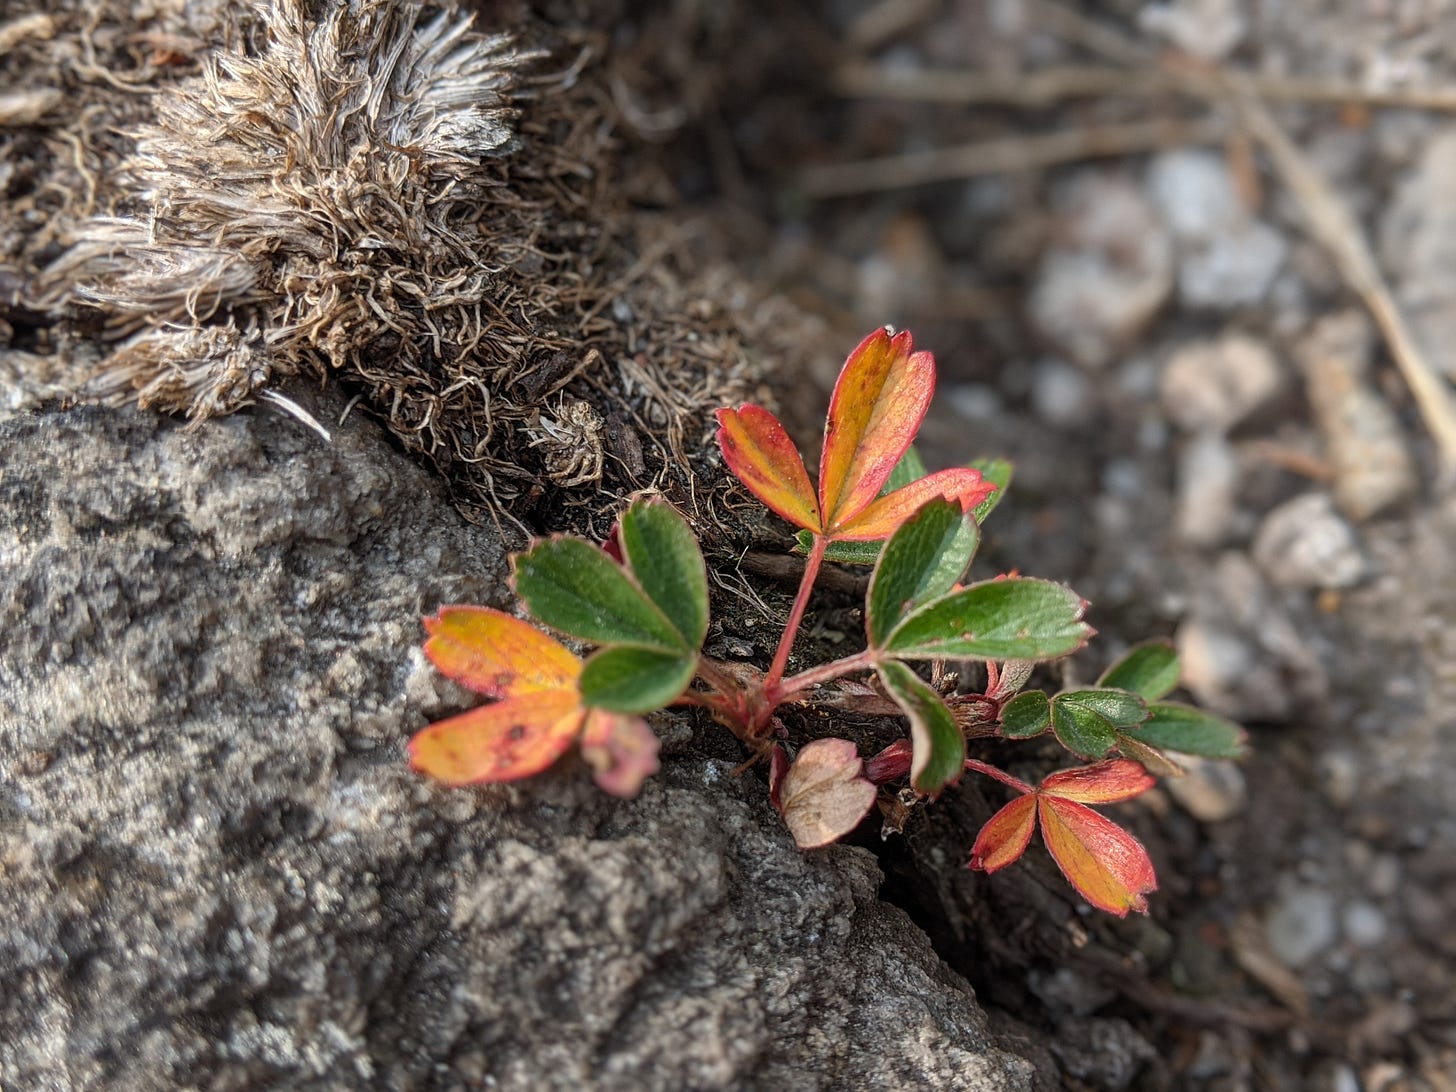 A close-up photograph of a small plant growing out of a crack in the rock, taken in the fall. Half the leaves are yellow tinged with red, the other half are green just starting to turn.